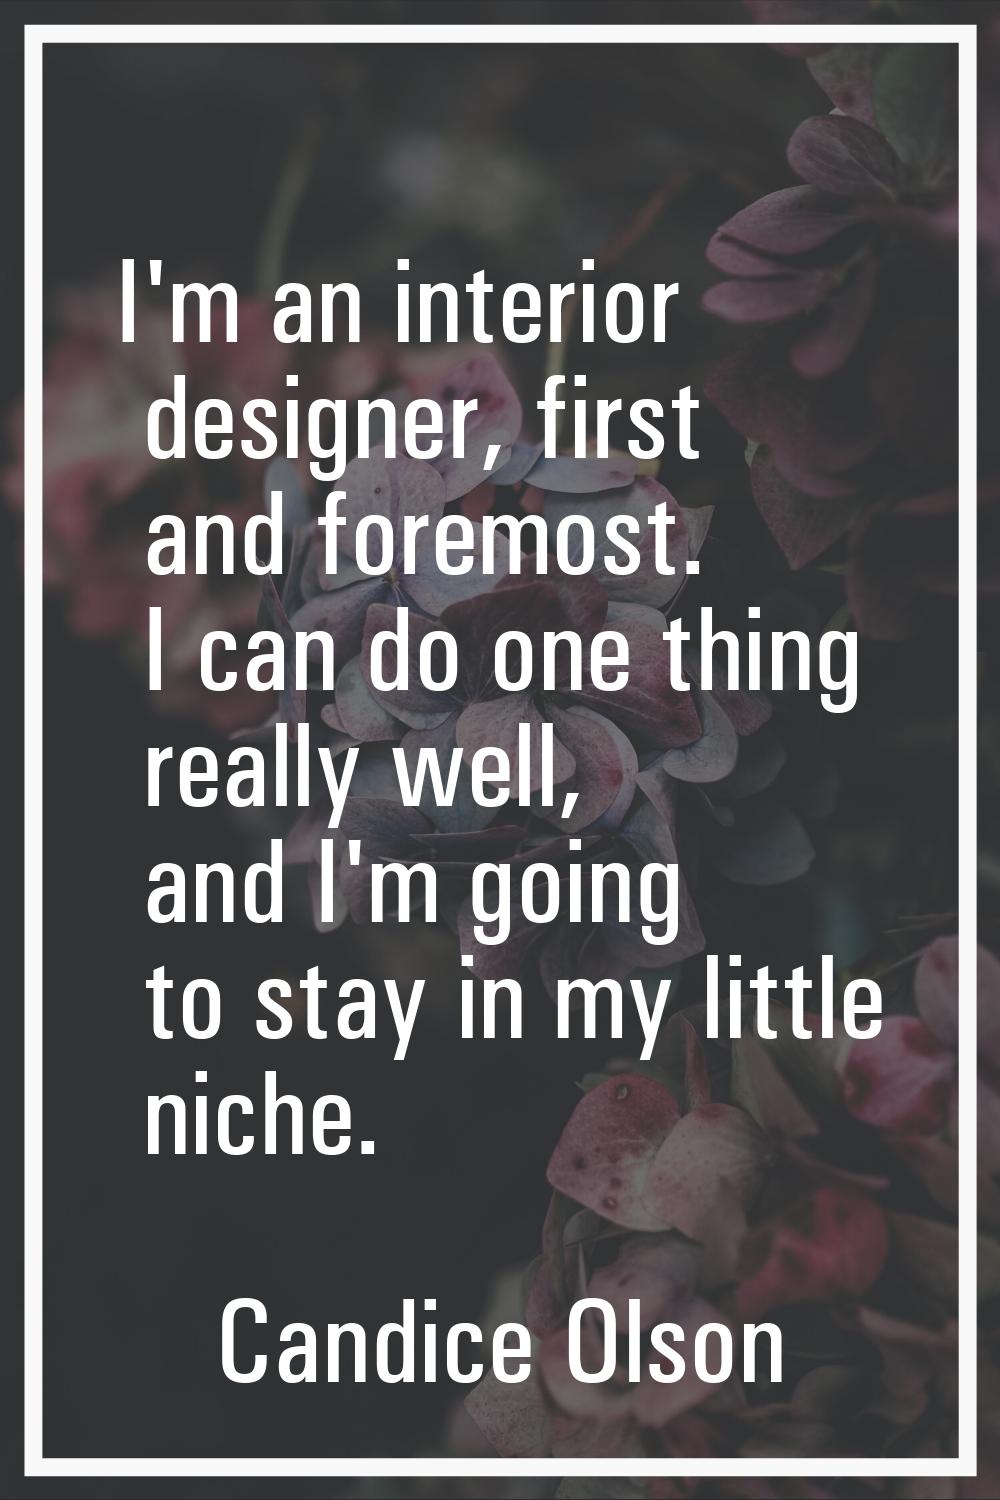 I'm an interior designer, first and foremost. I can do one thing really well, and I'm going to stay